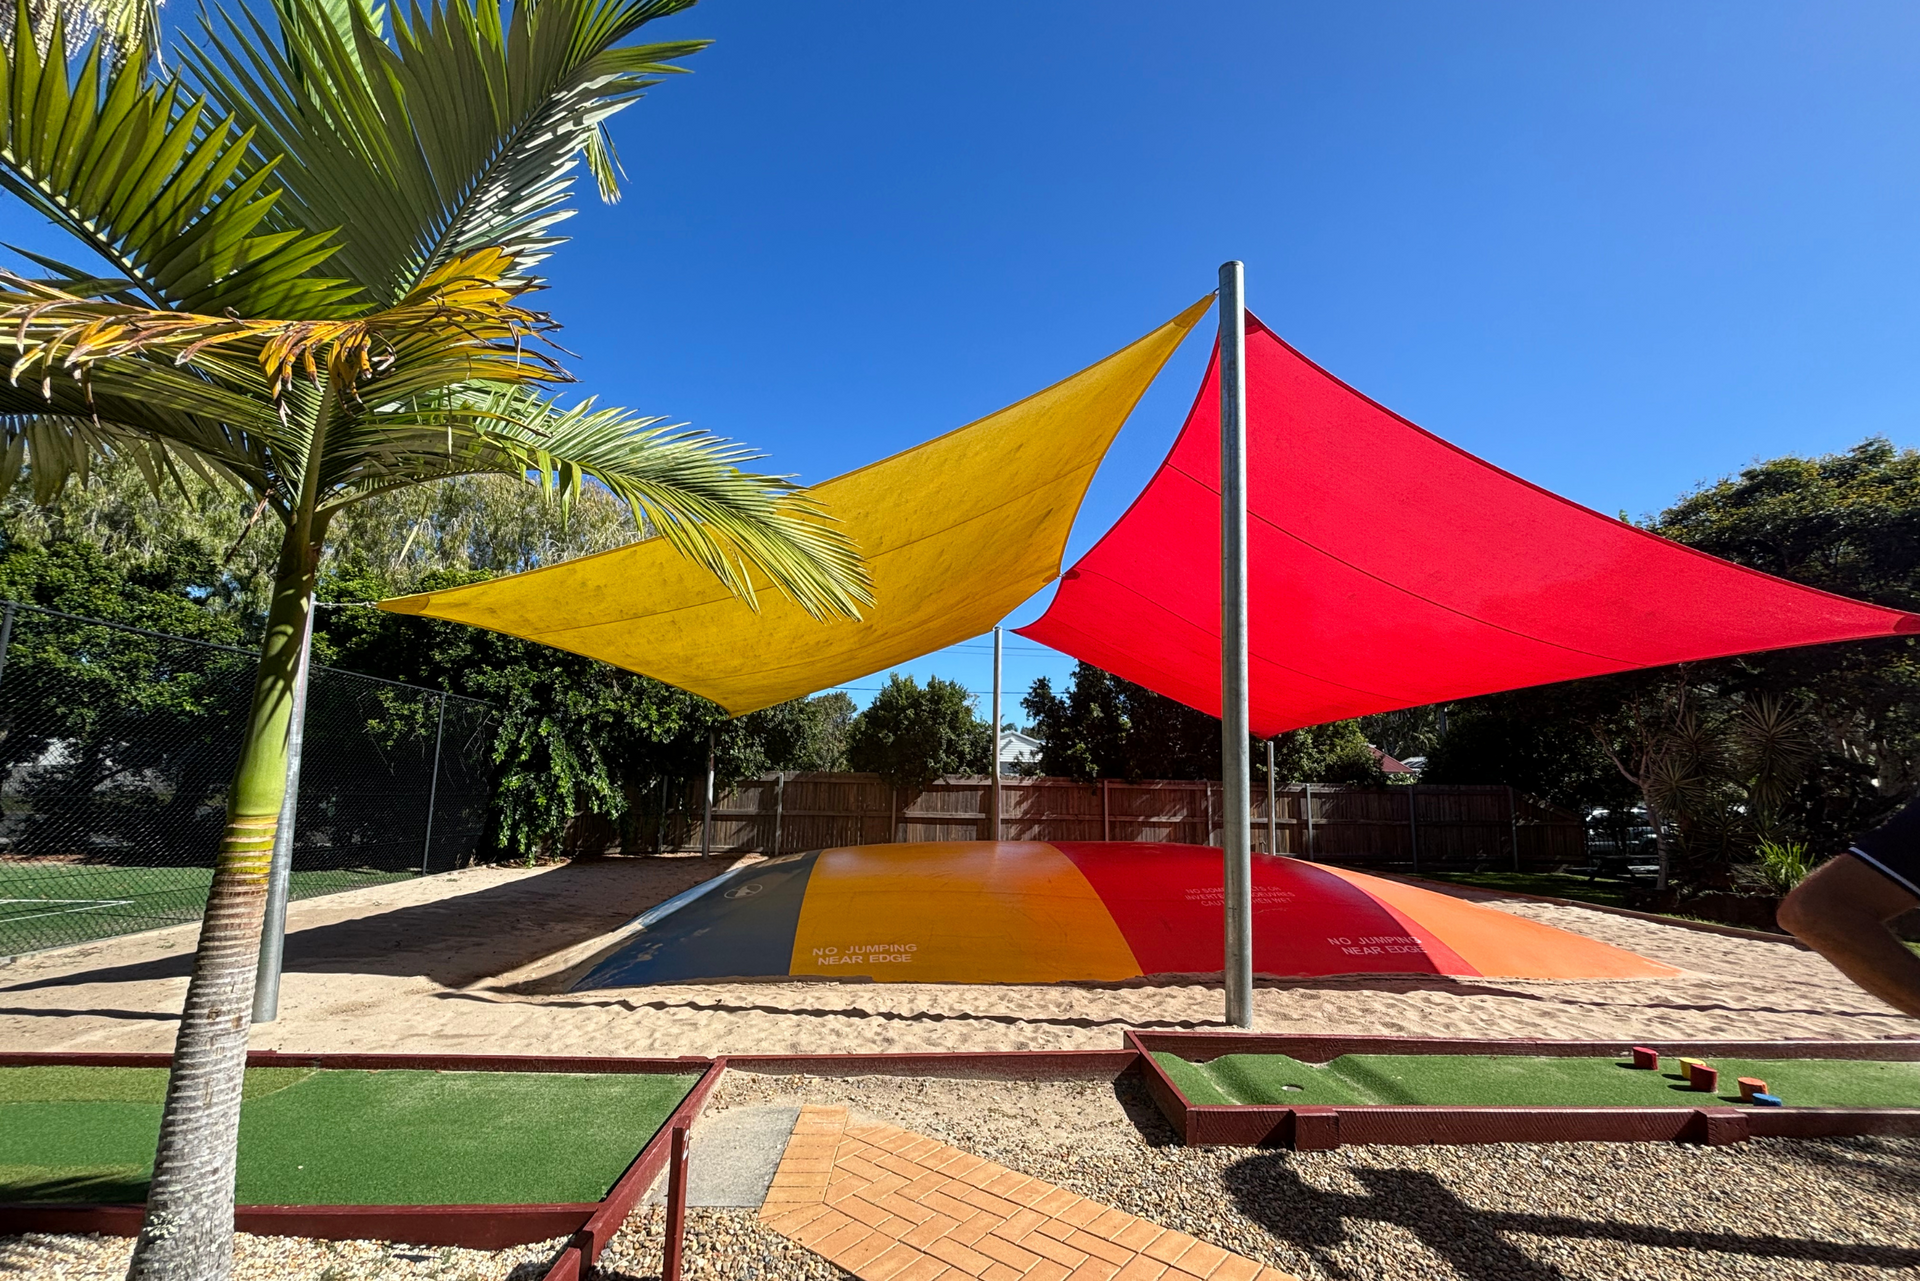 A playground with a red , yellow and orange umbrella